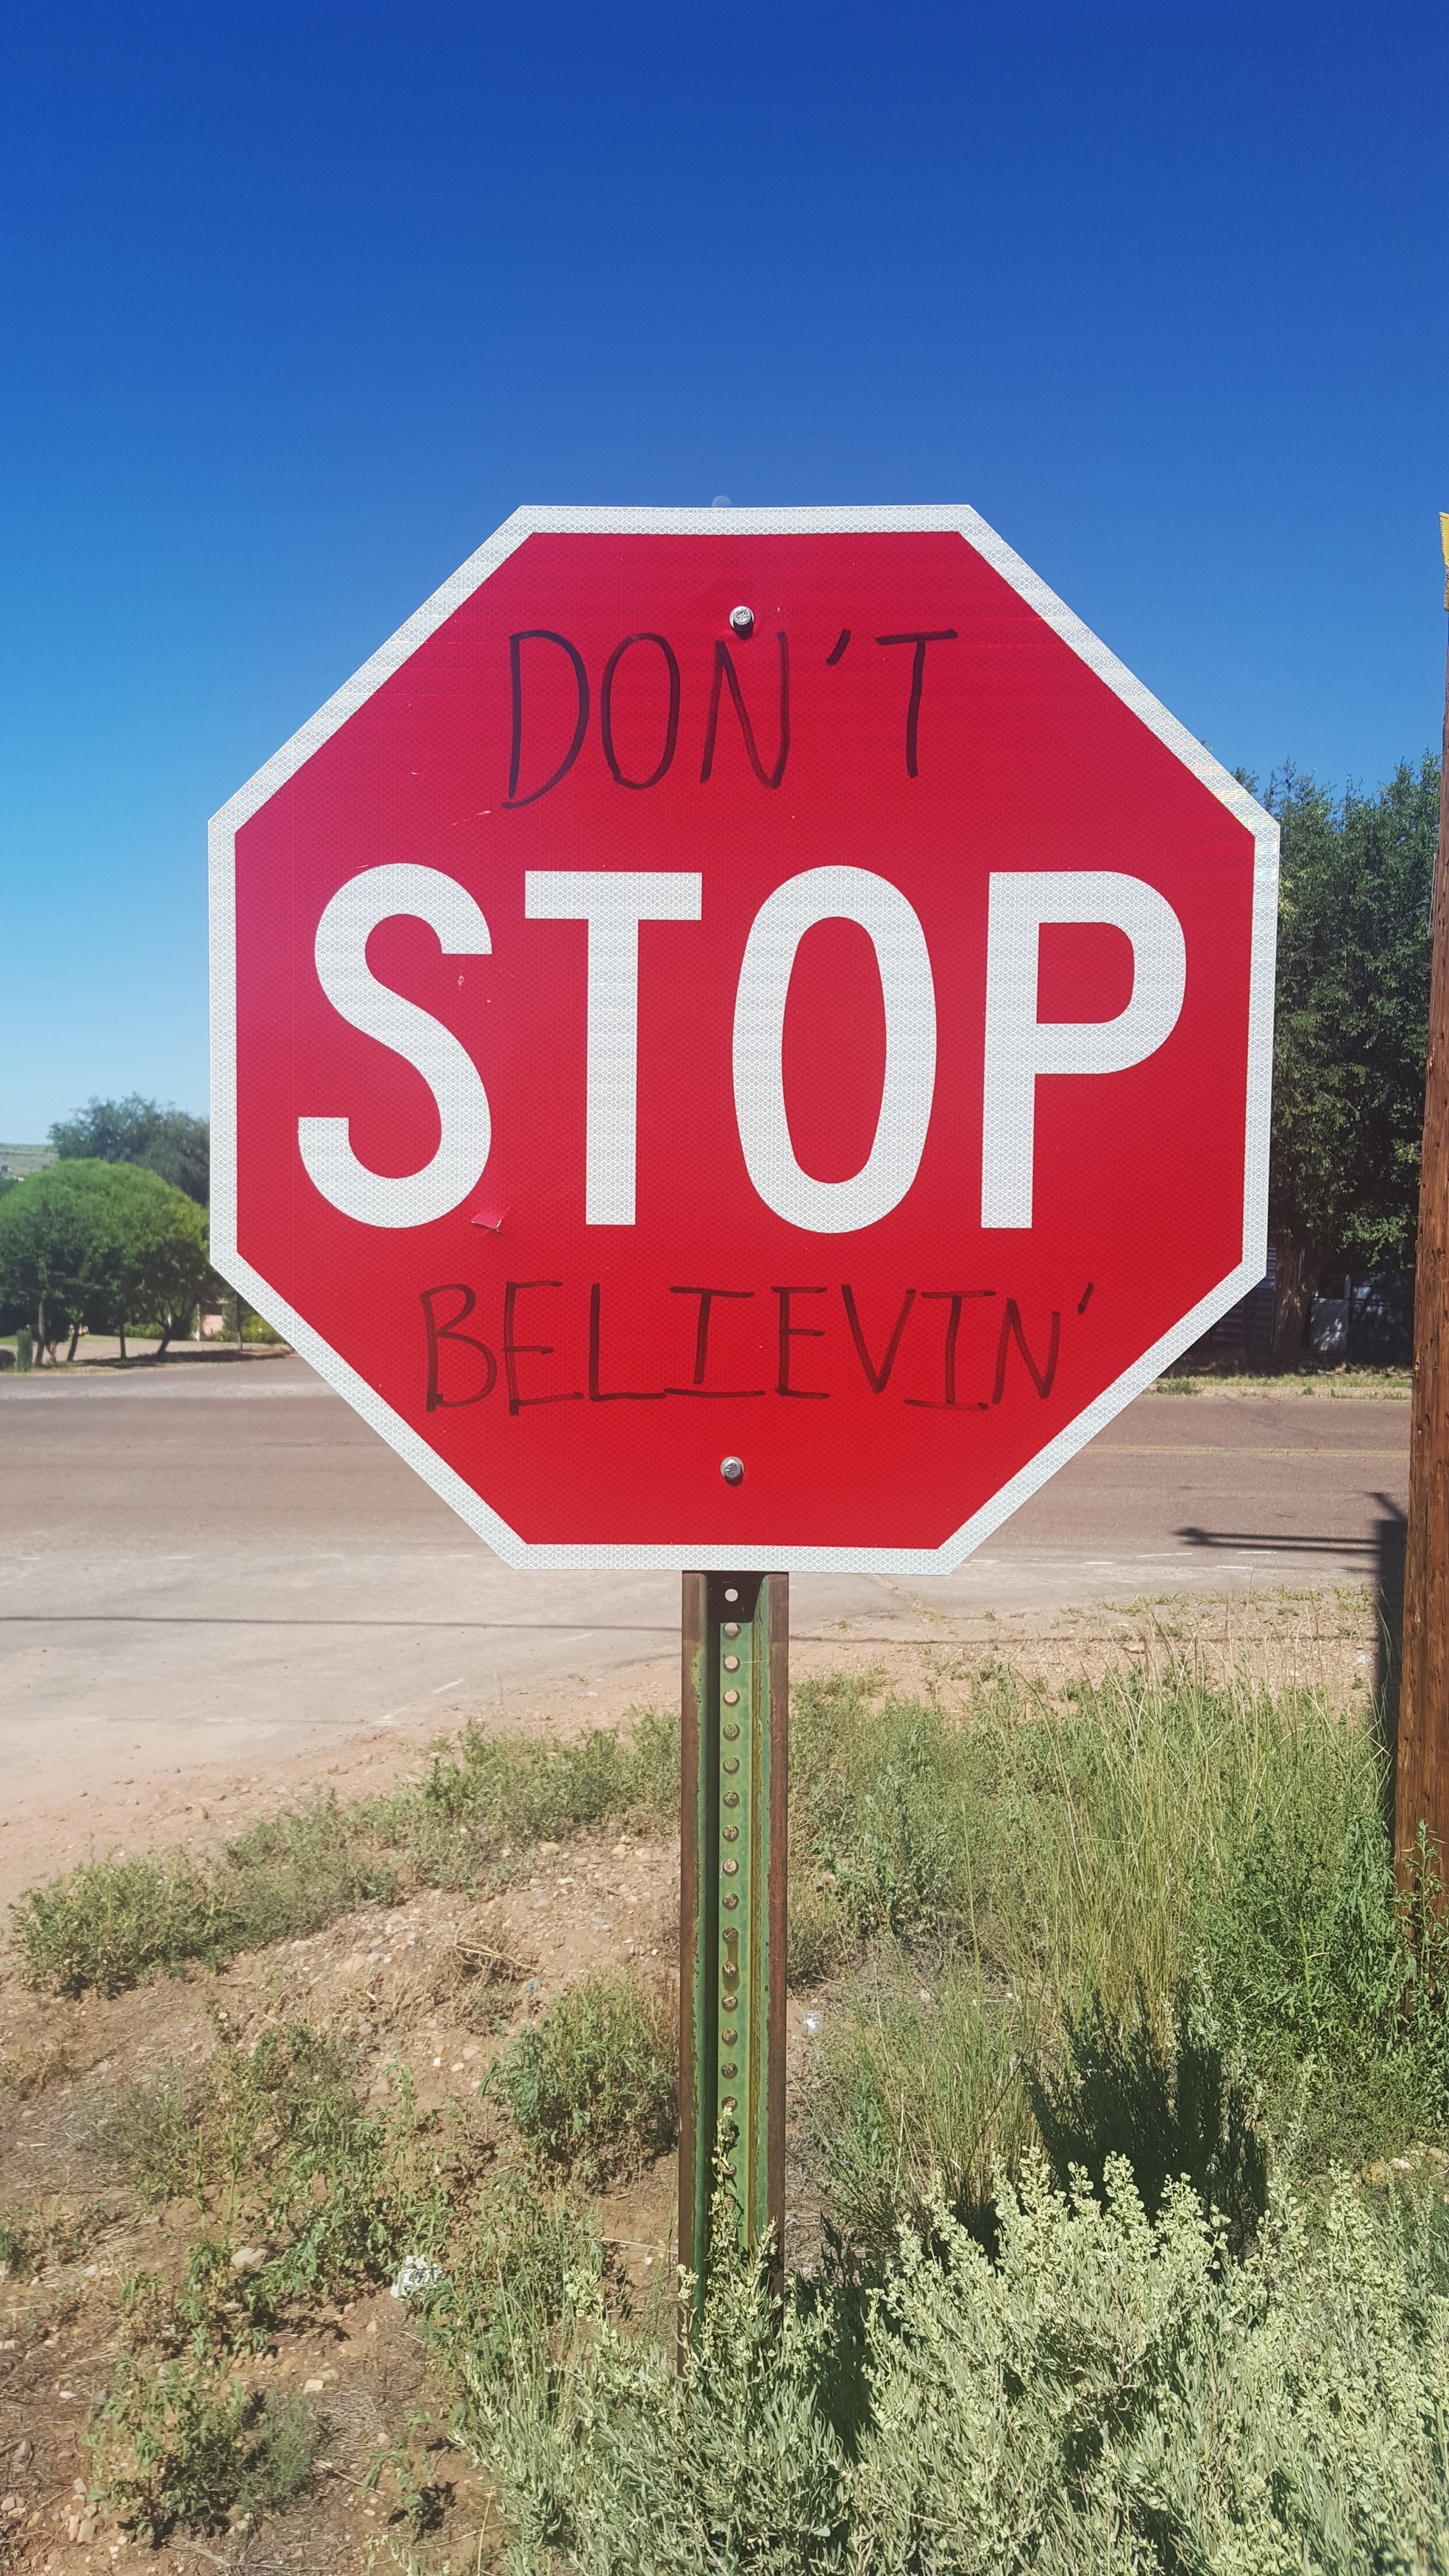 don't stop believin' signage